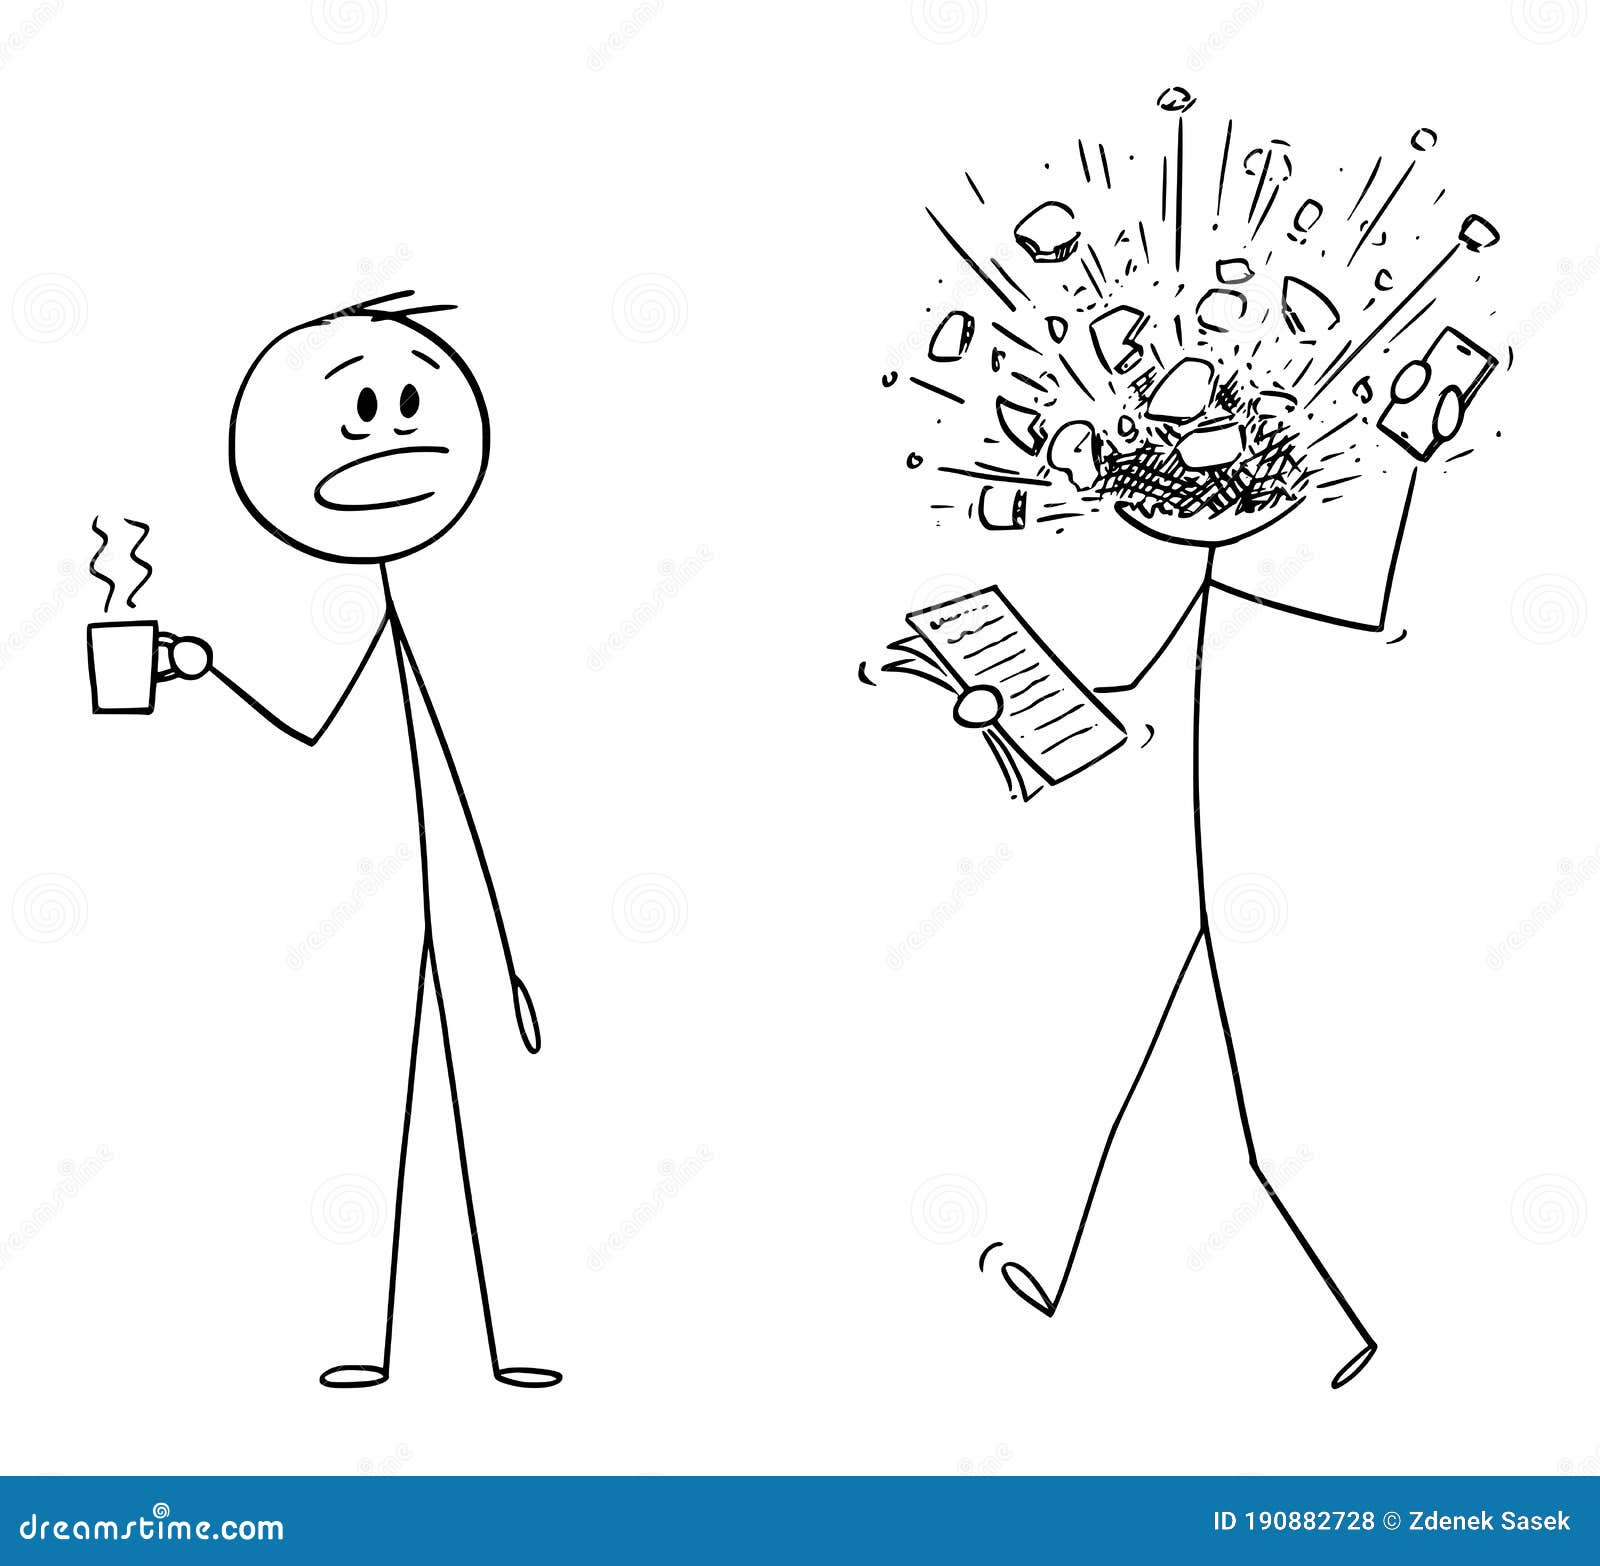  cartoon  of man, office worker or businessman at work, his head exploded from stress or overwork.